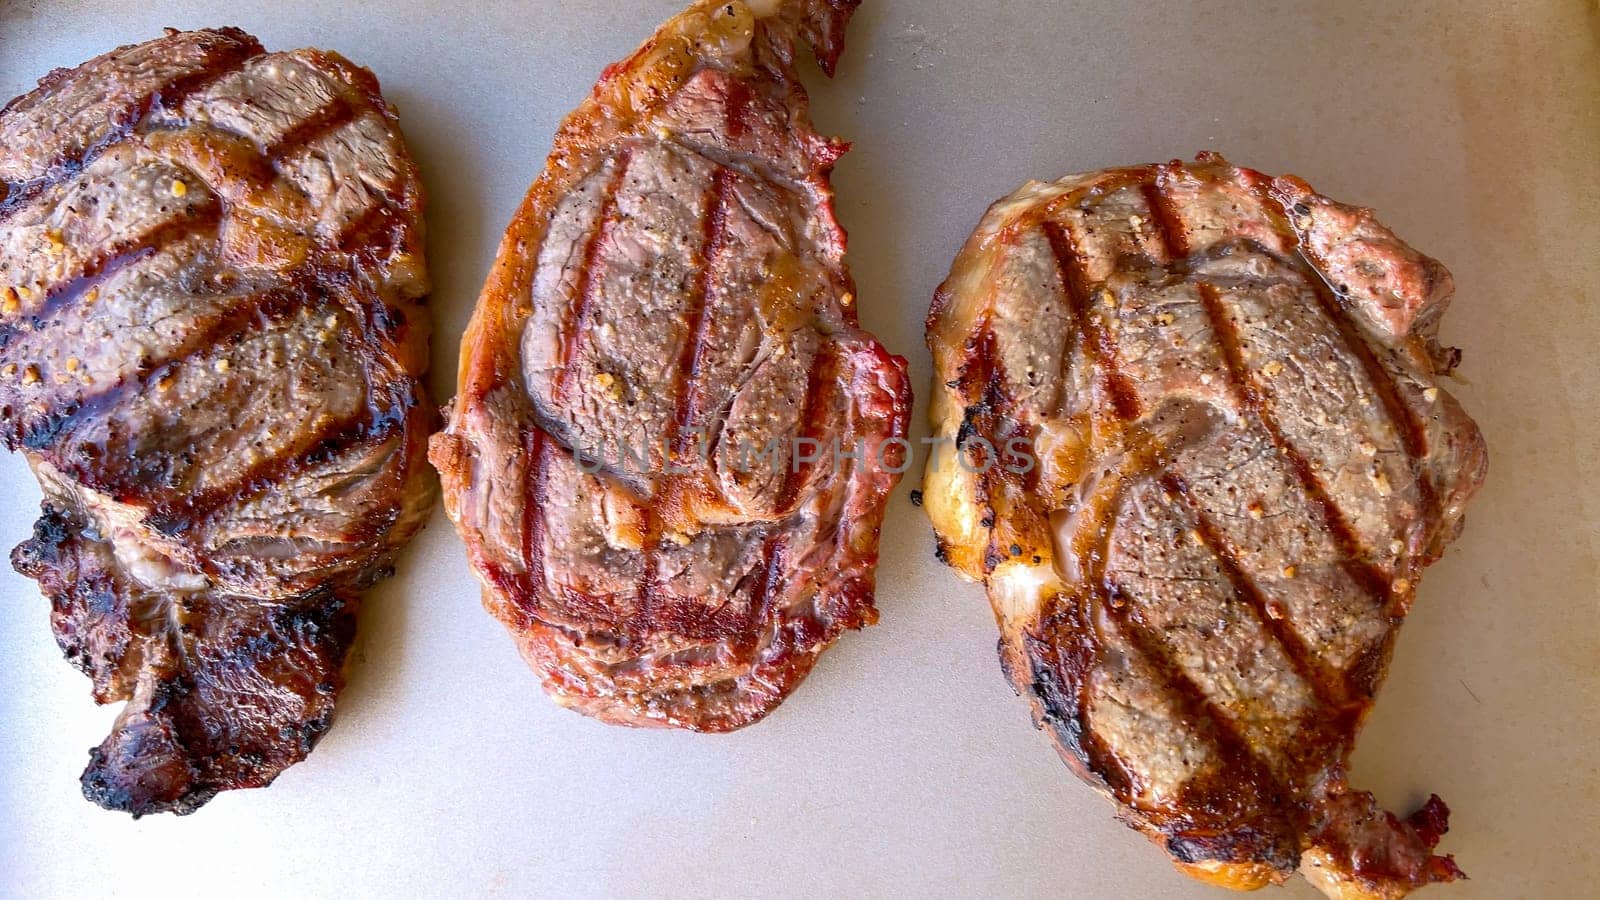 Grilled Ribeye Steaks with Perfect Char Marks Ready to Serve by arinahabich